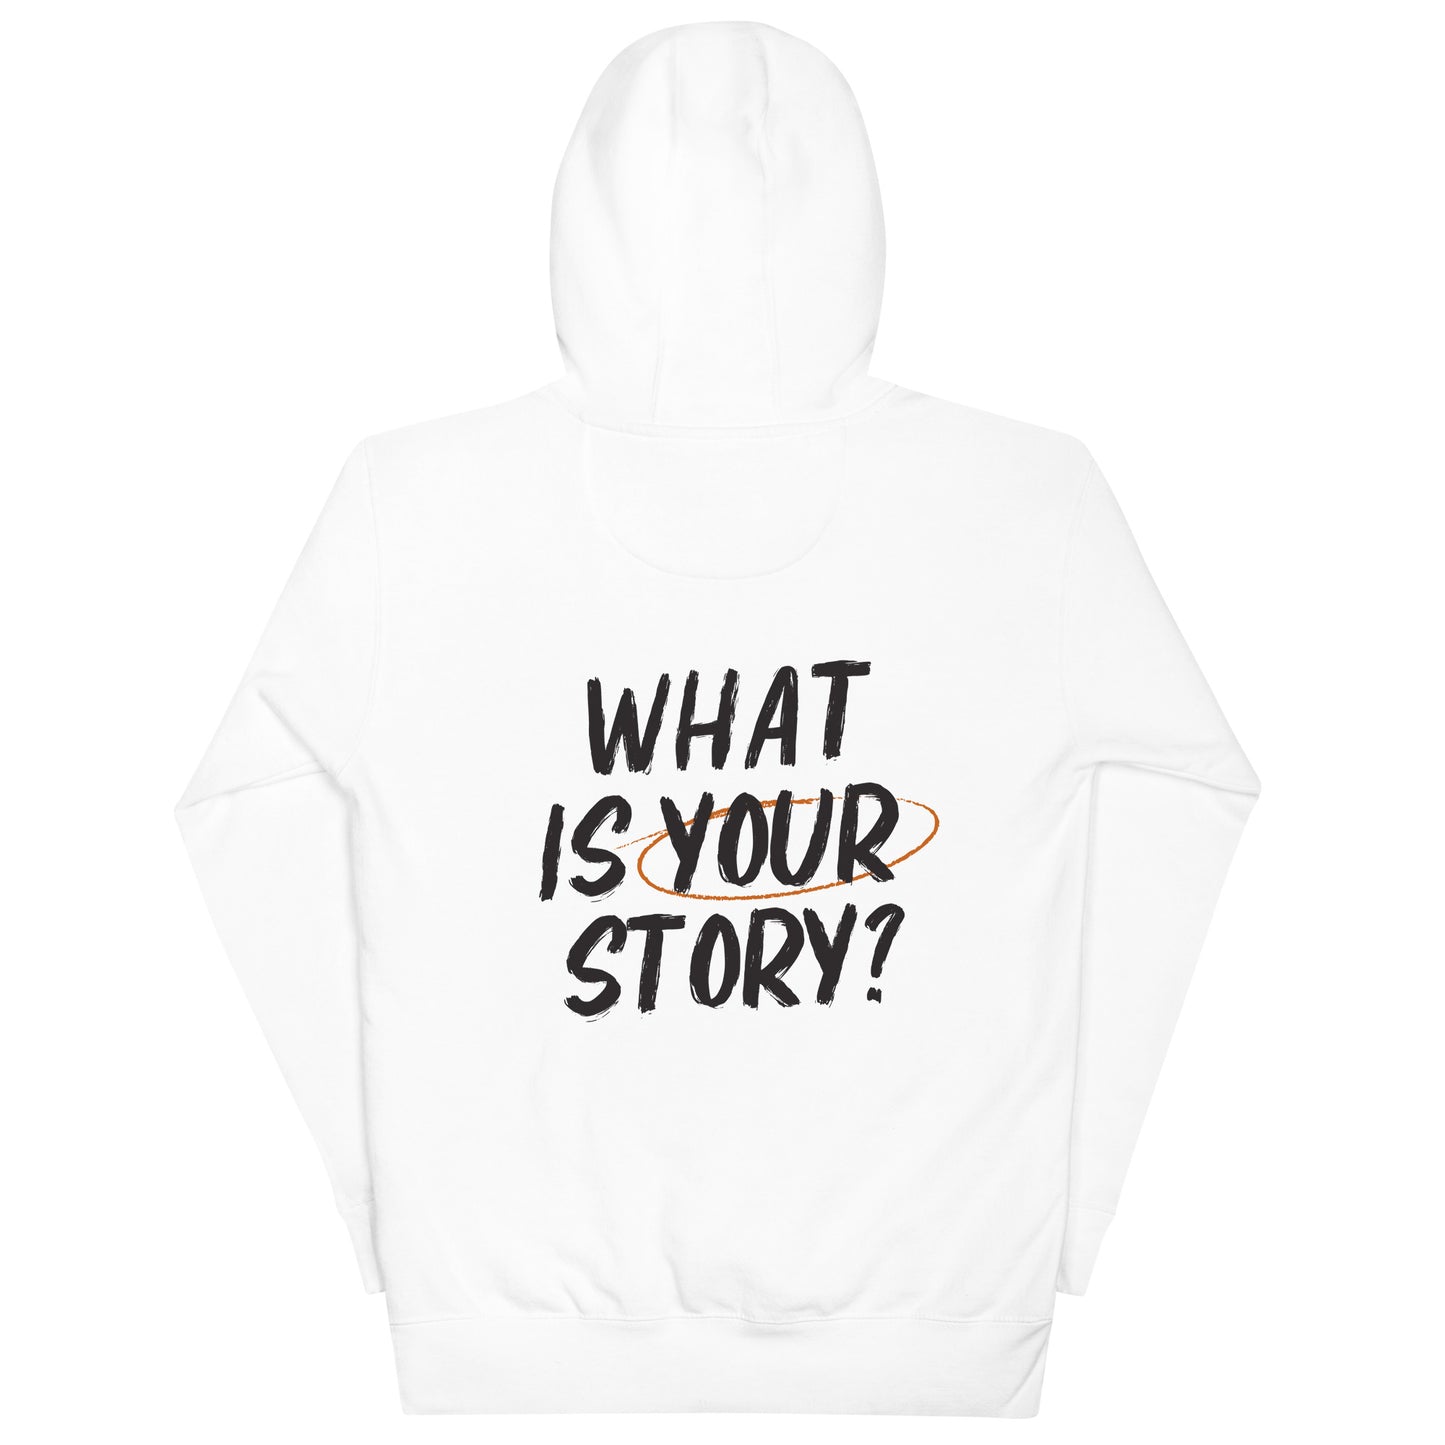 I Know Lonely, What's Your Story: Hoodie - Only7Seconds Shop